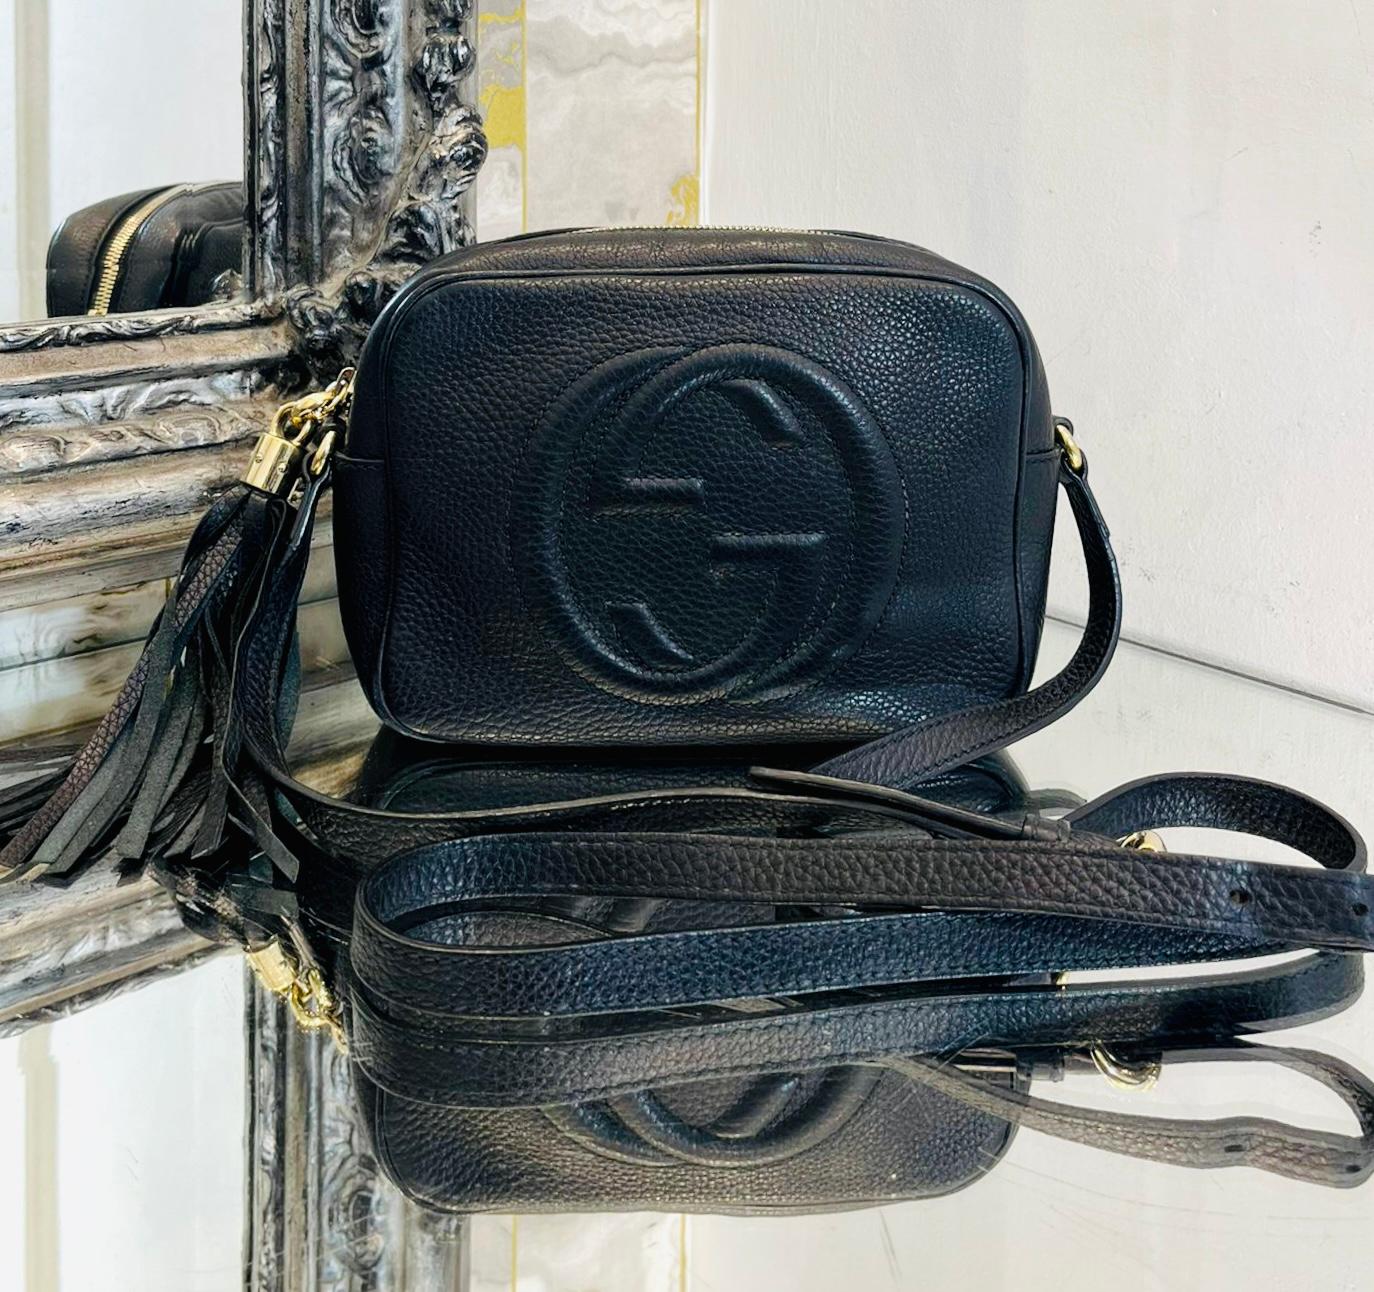 Gucci Soho Leather Camera Bag

Black crossbody bag designed with 'GG' logo embossed to the front.

Featuring gold hardware and tassel detailed top zip closure leading to two interior open pockets.

Size – Height 15cm, Width 20cm, Depth